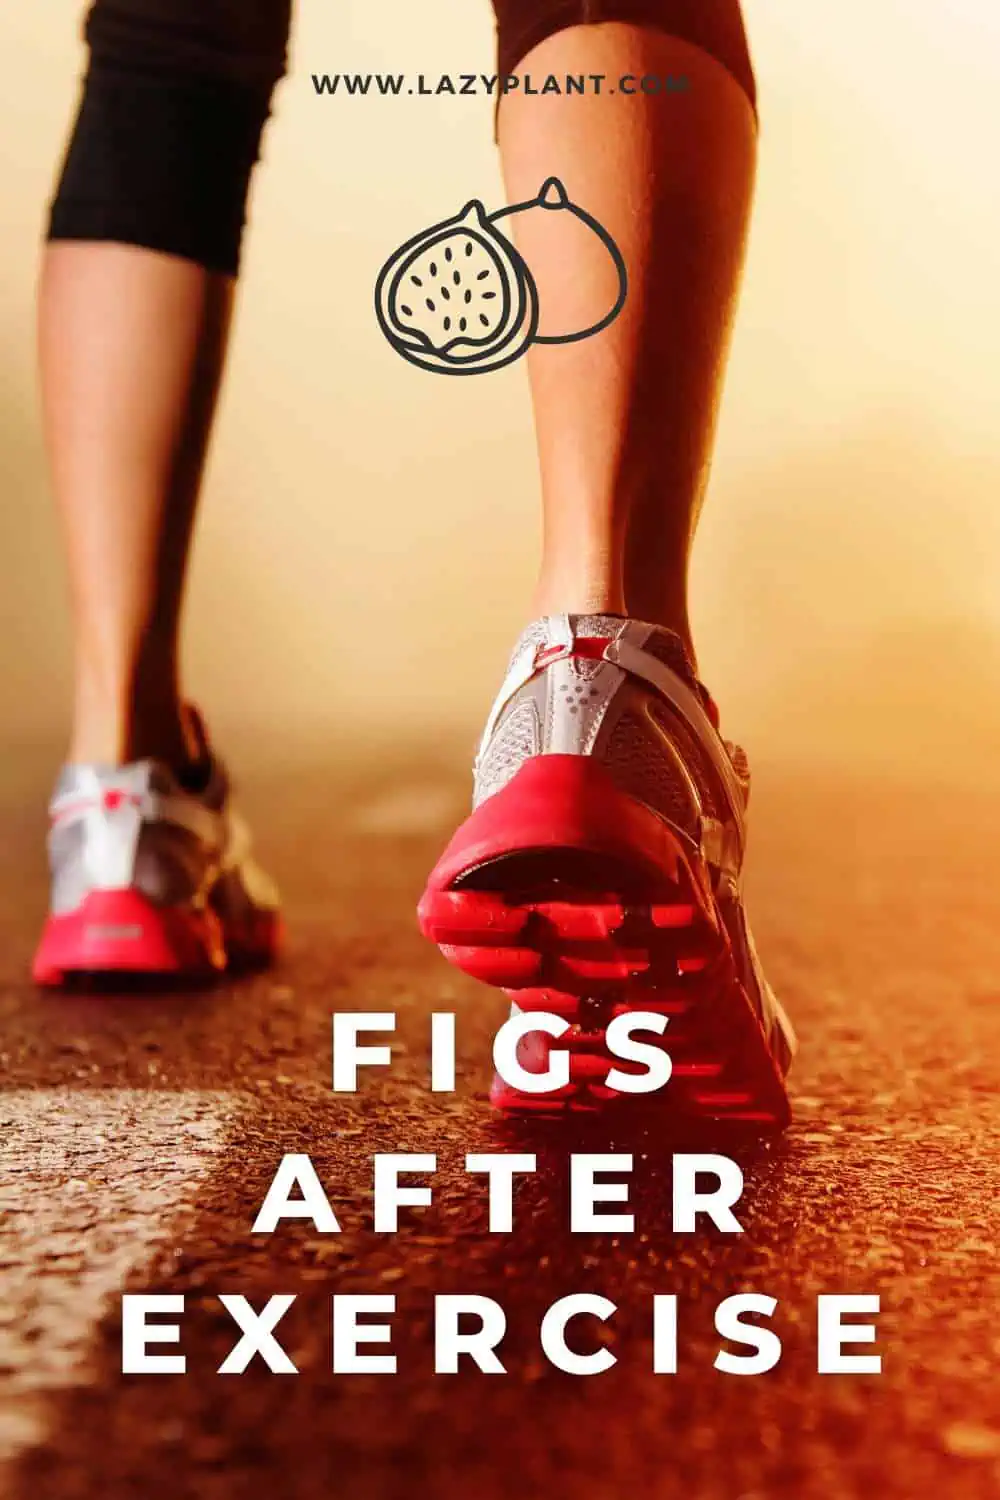 Figs can improve athletic performance!